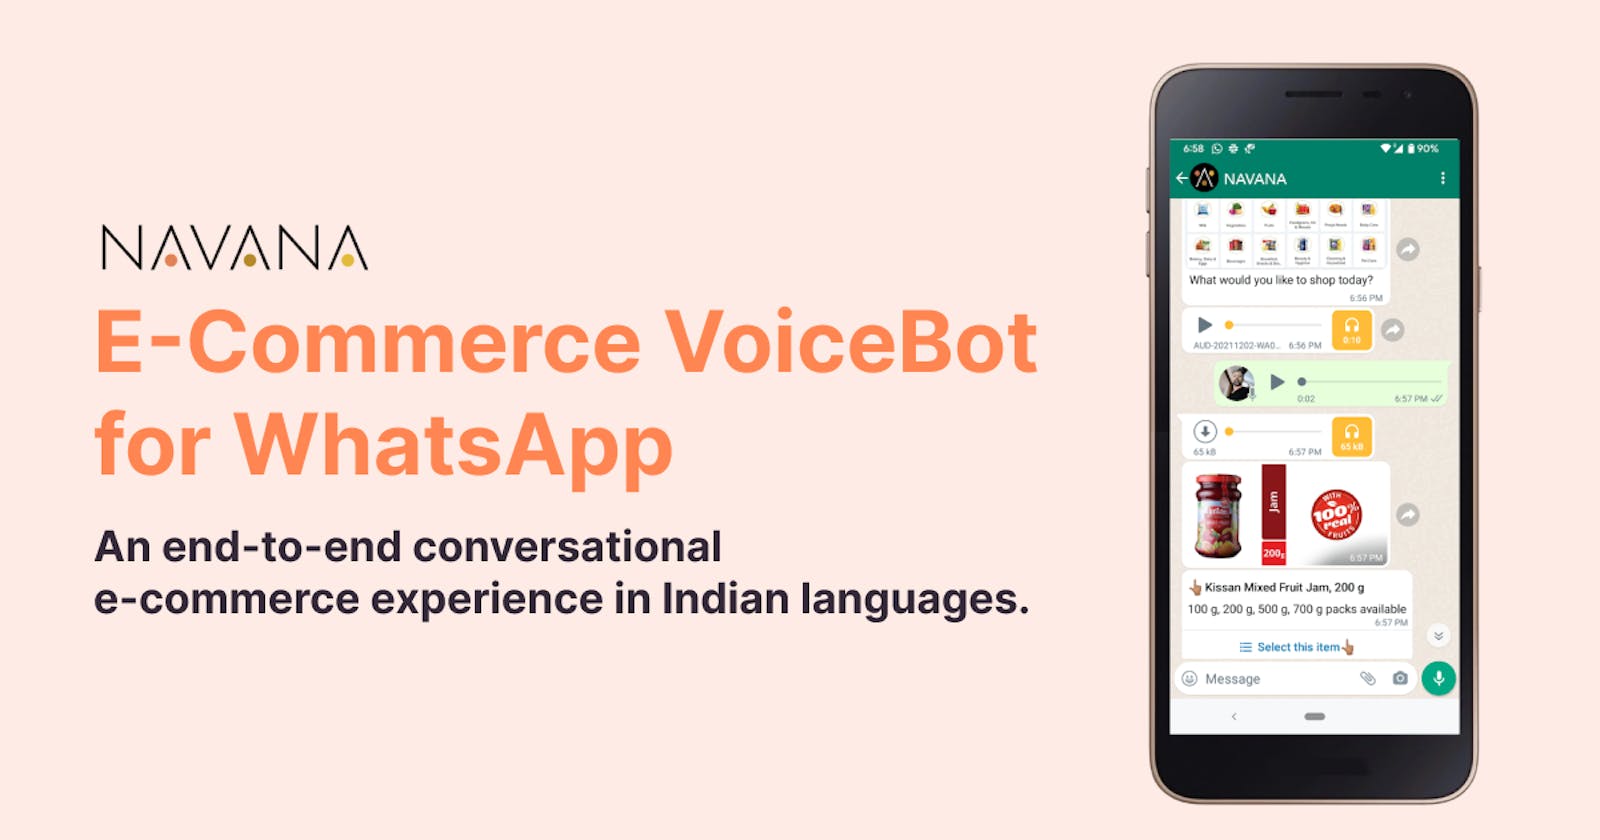 What's all the chit-chat? - Introduction to WhatsApp VoiceBot for E-commerce